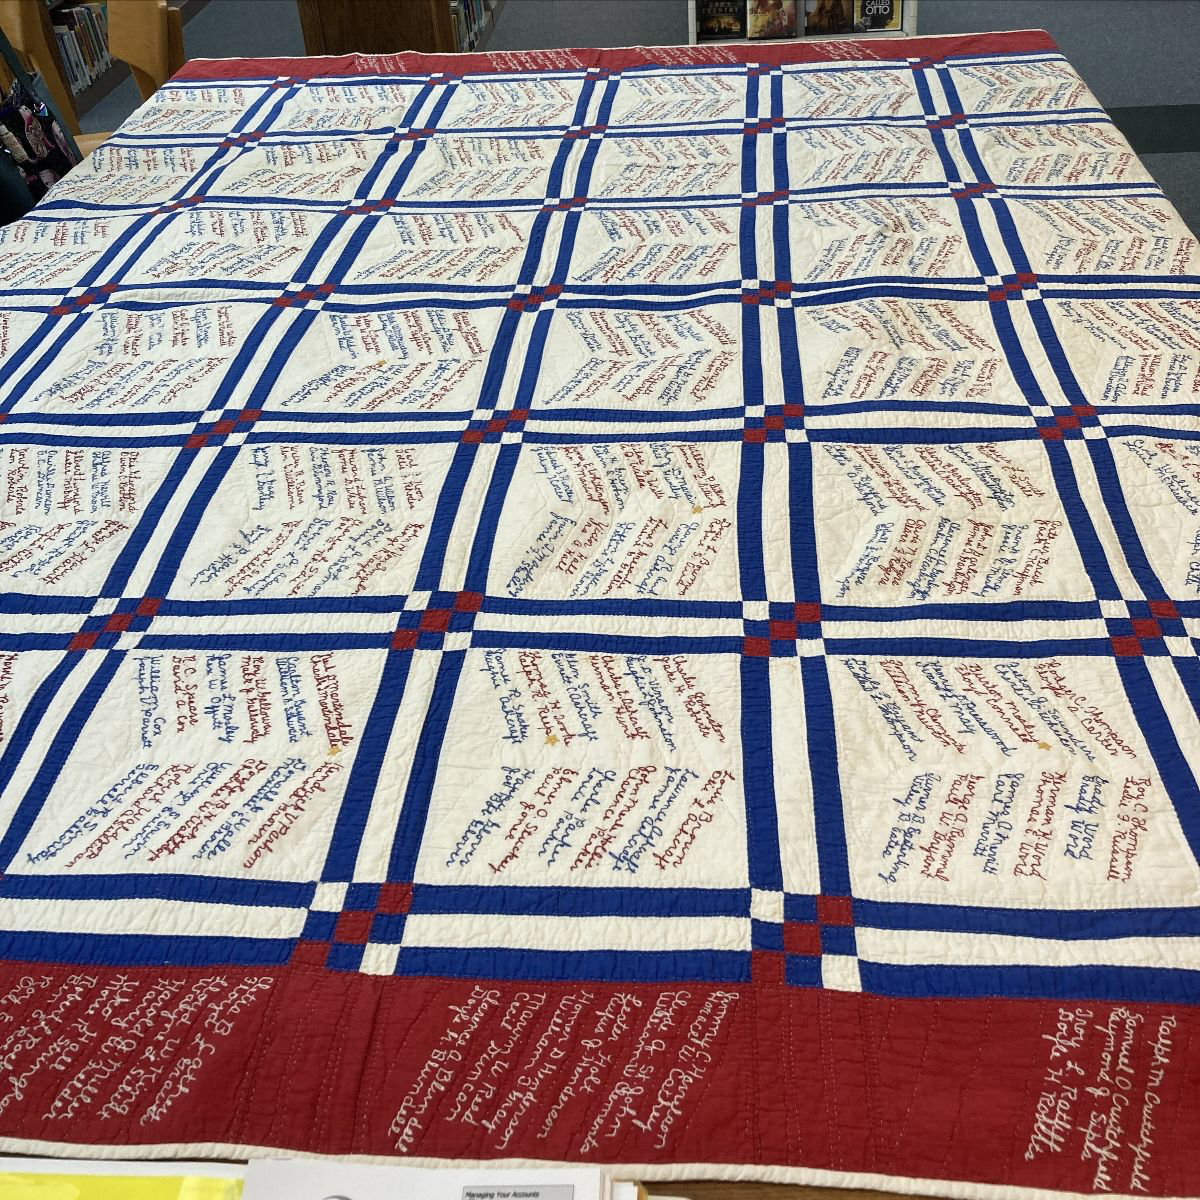 Group makes quilts for Hospice and foster care in Cleveland County